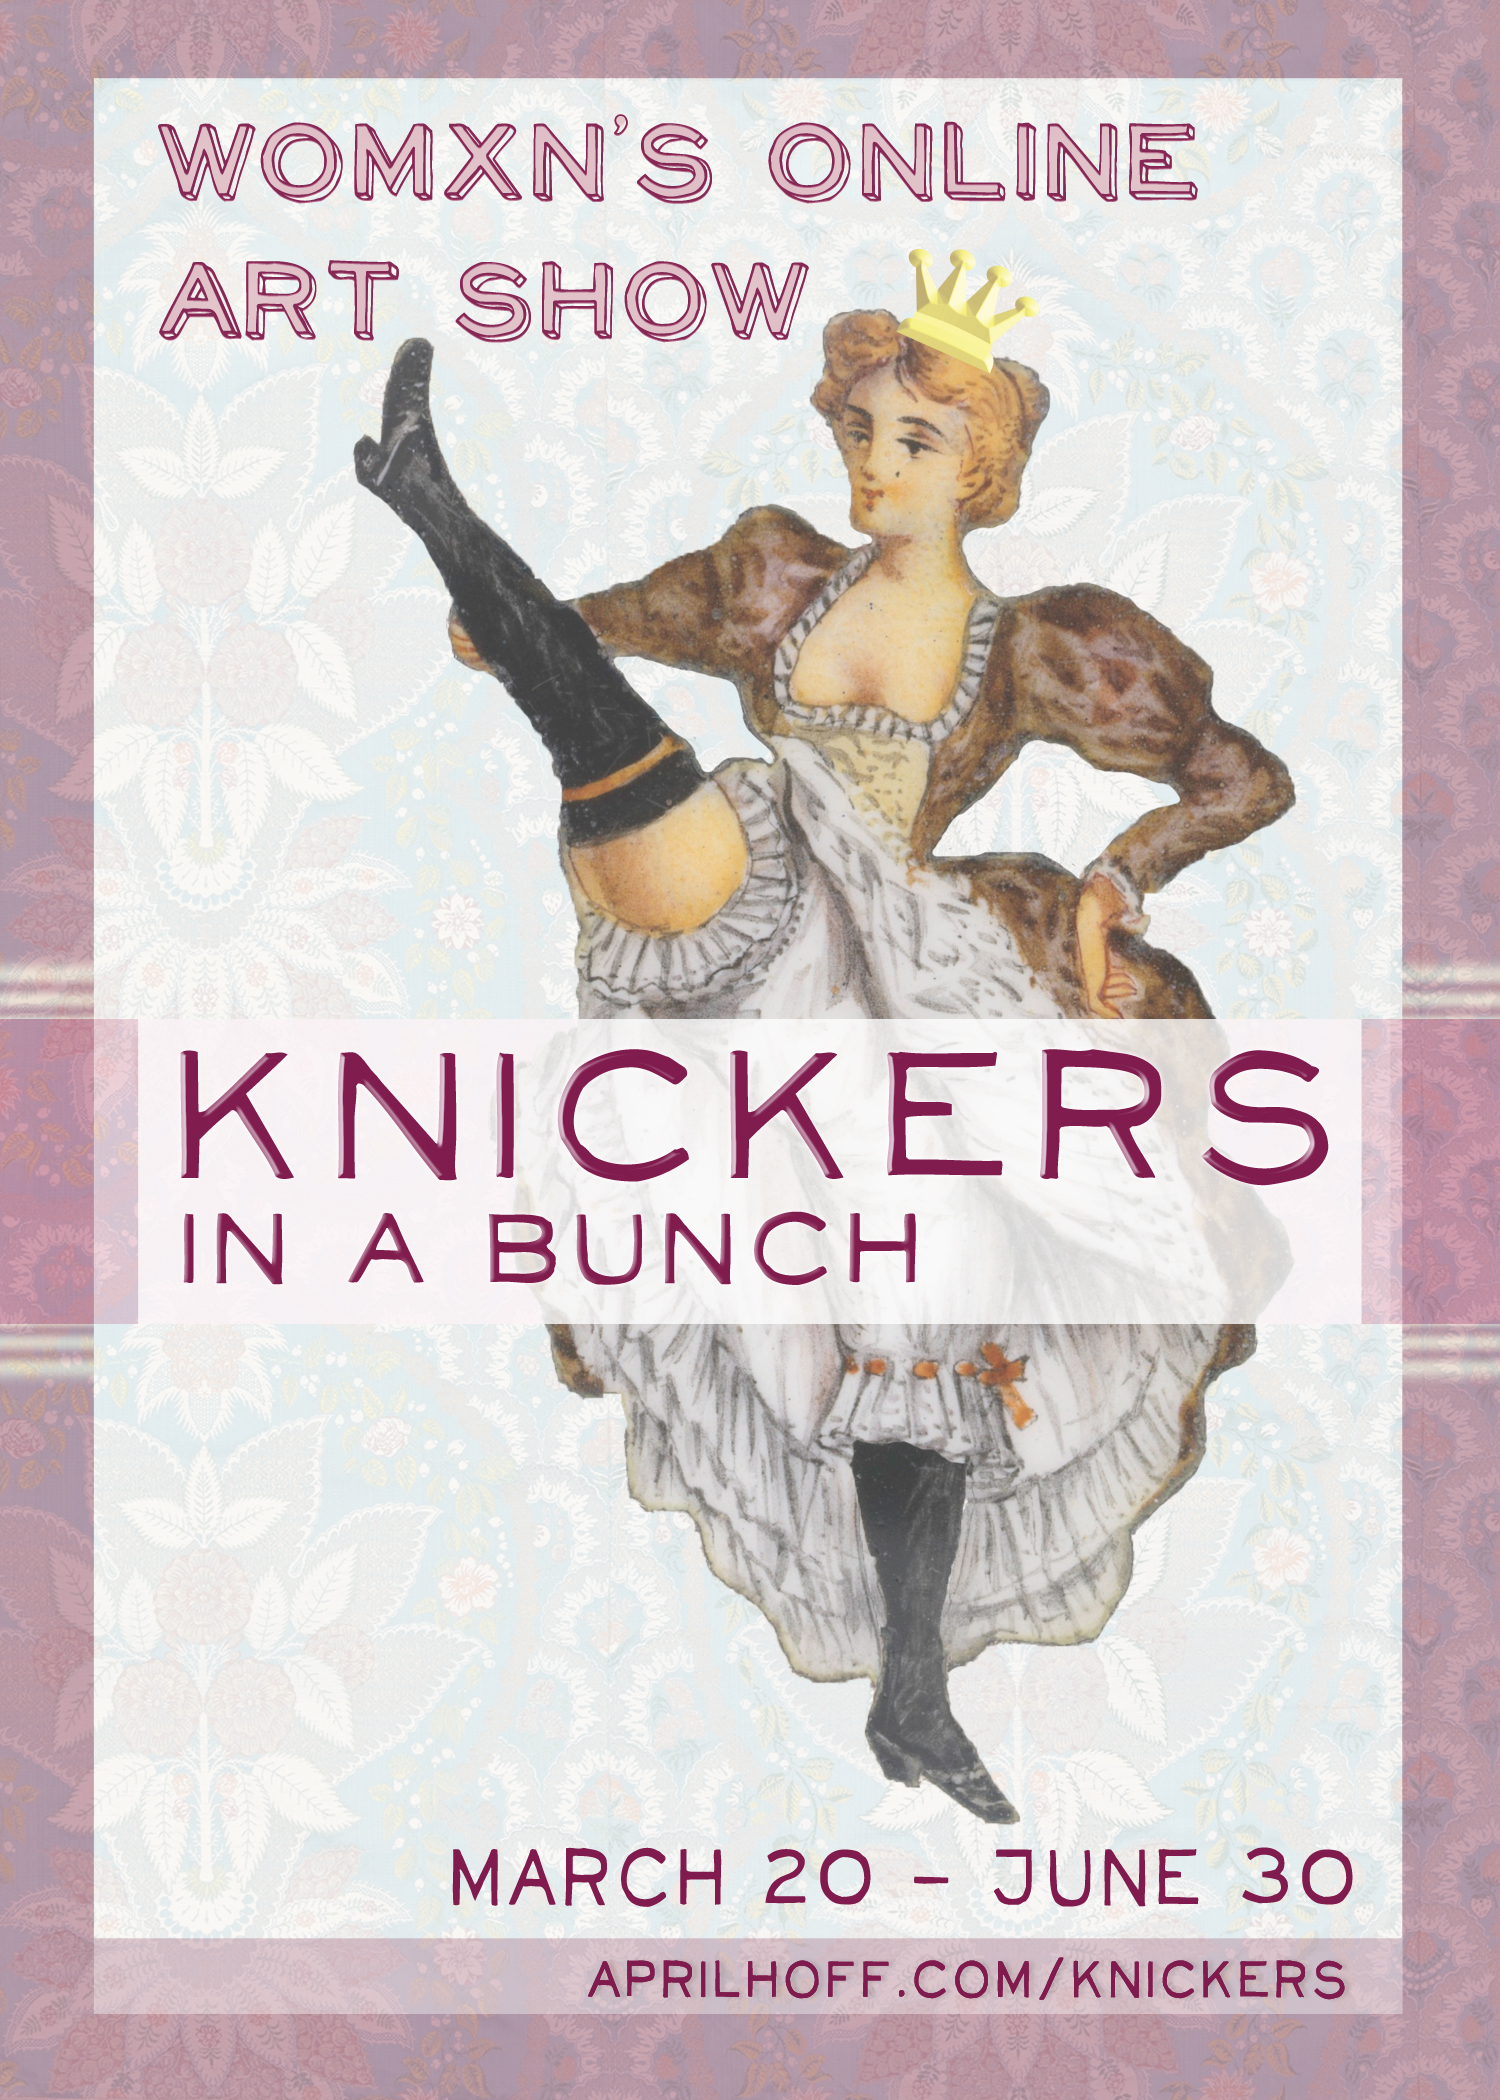 Knickers in a Bunch show announcement by April Hoff with appropriated vintage cancan woman illustration